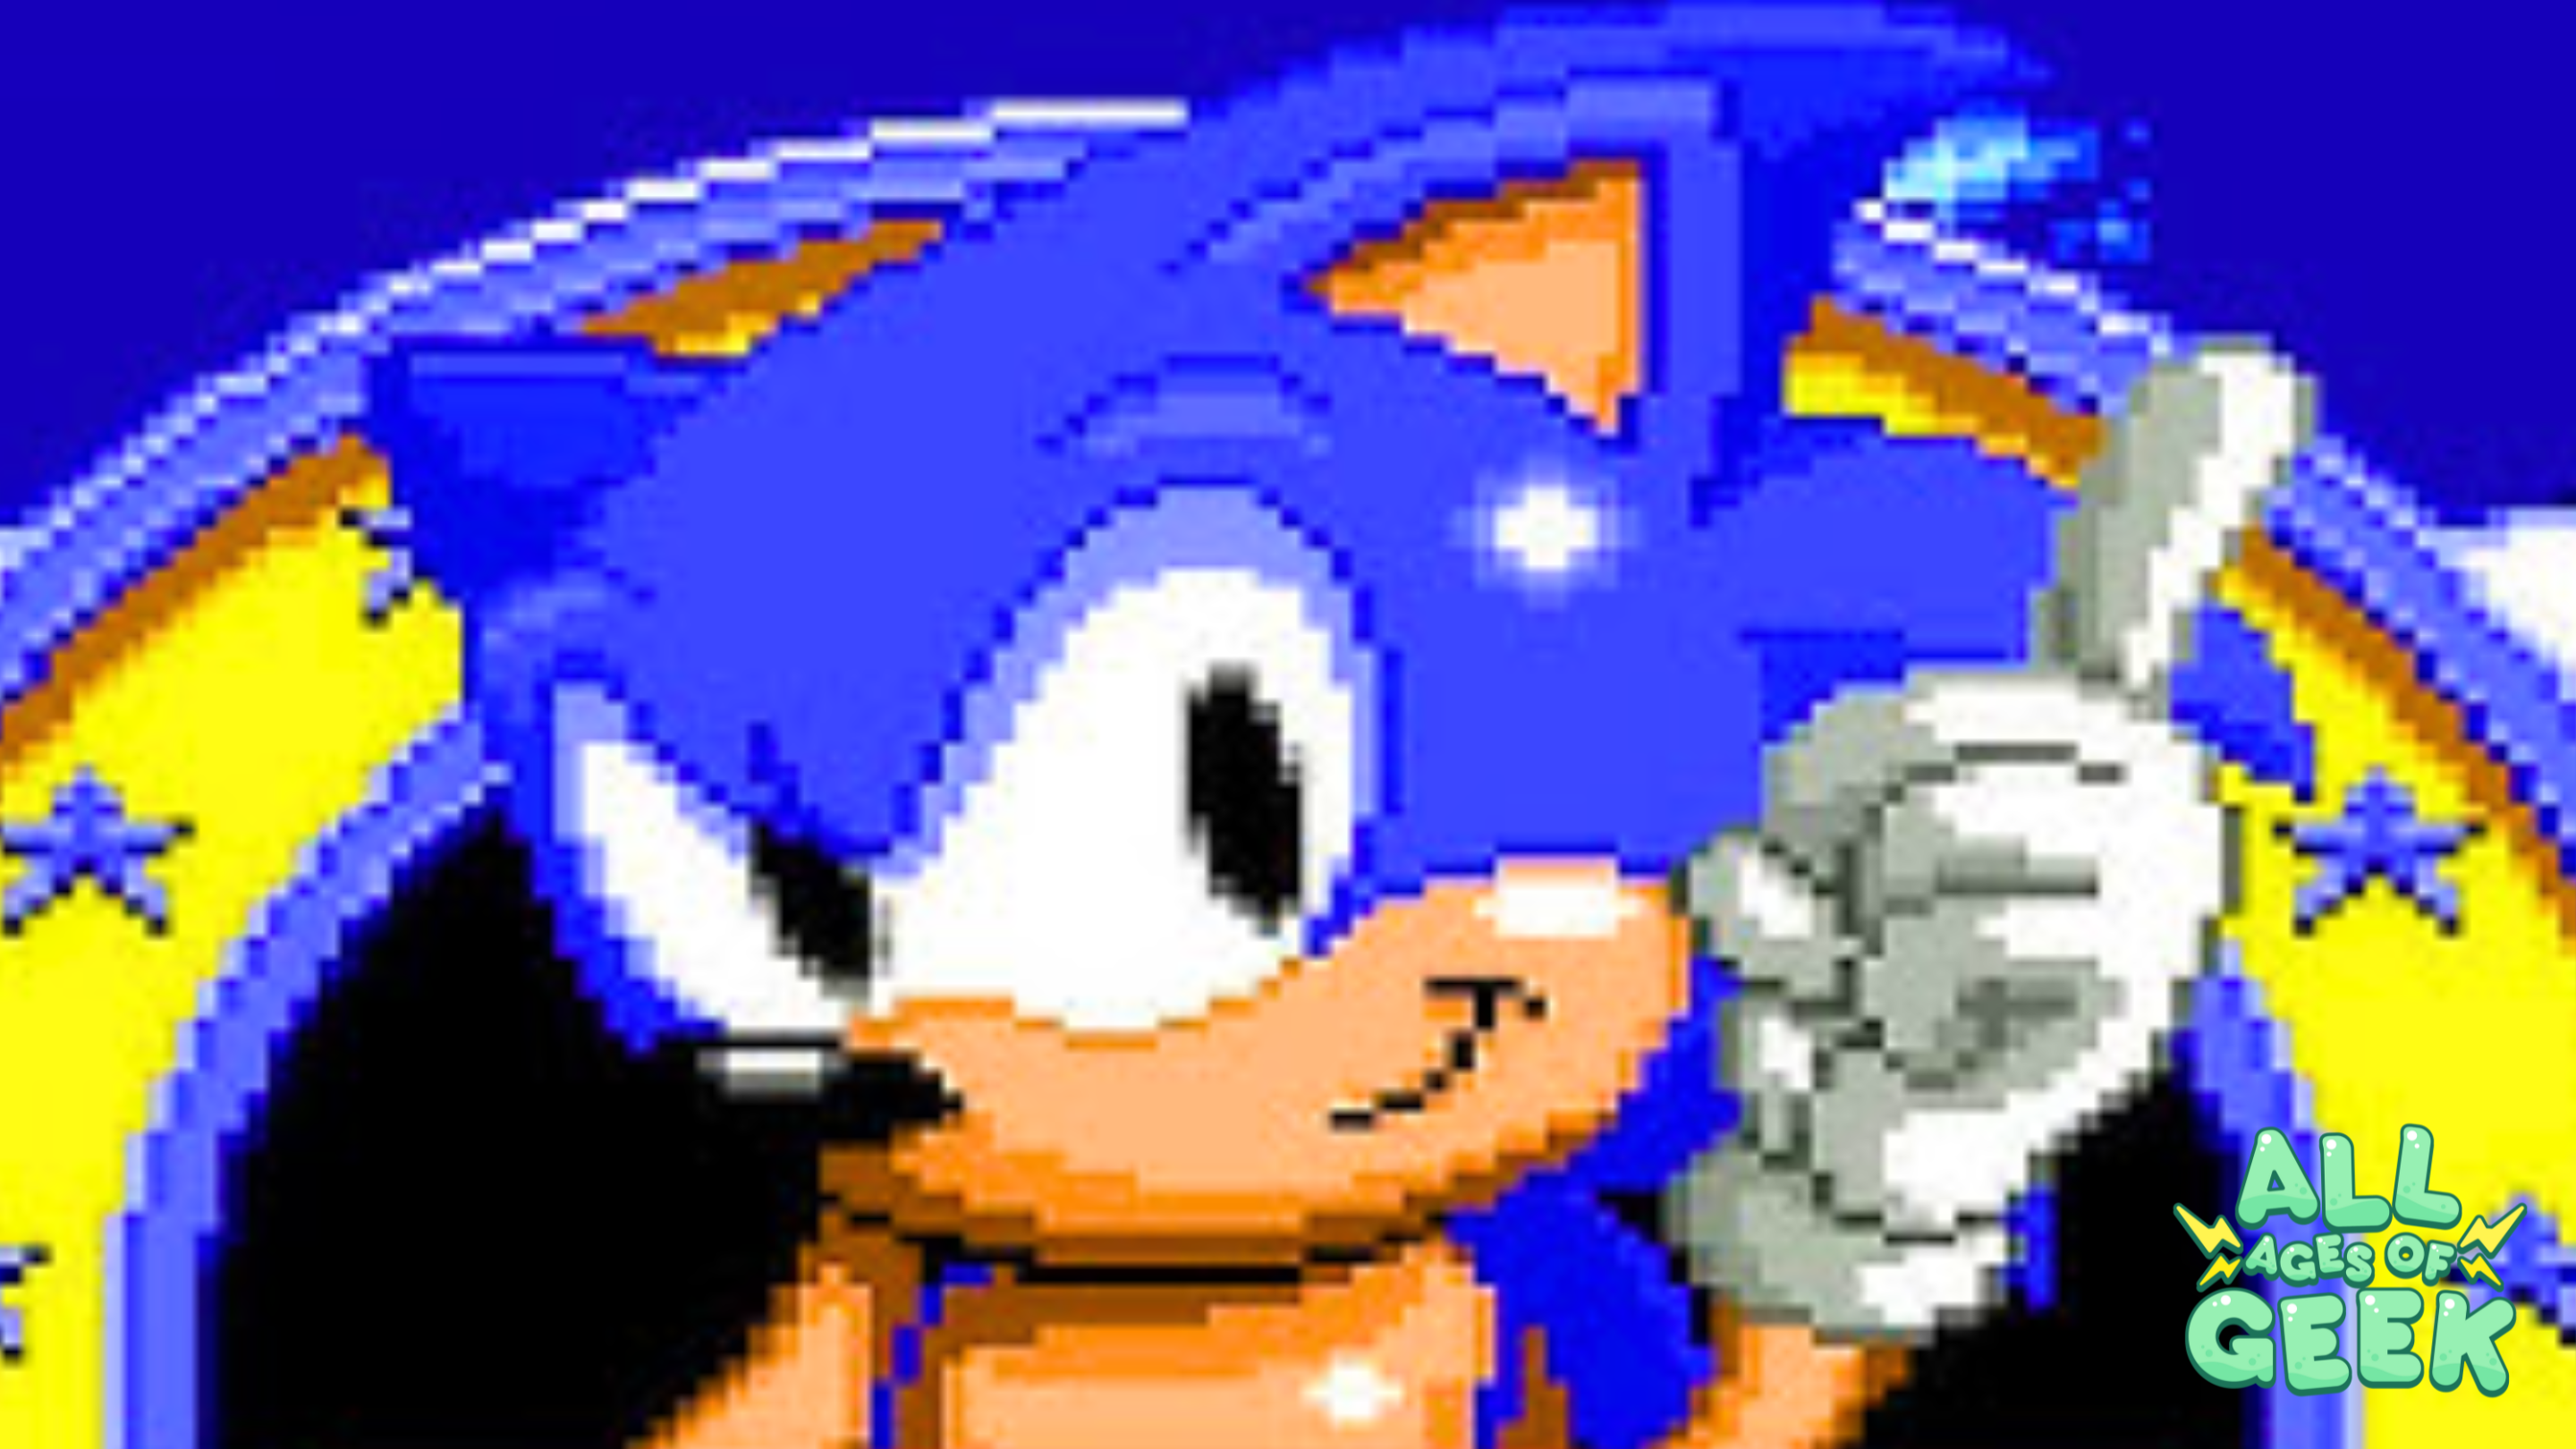 The image shows a pixel art depiction of Sonic the Hedgehog, a well-known video game character. Sonic is giving a thumbs-up with his right hand, while smiling. The background features a large gold ring with blue stars and a blue sky. In the bottom-right corner, the "All Ages of Geek" logo is visible.